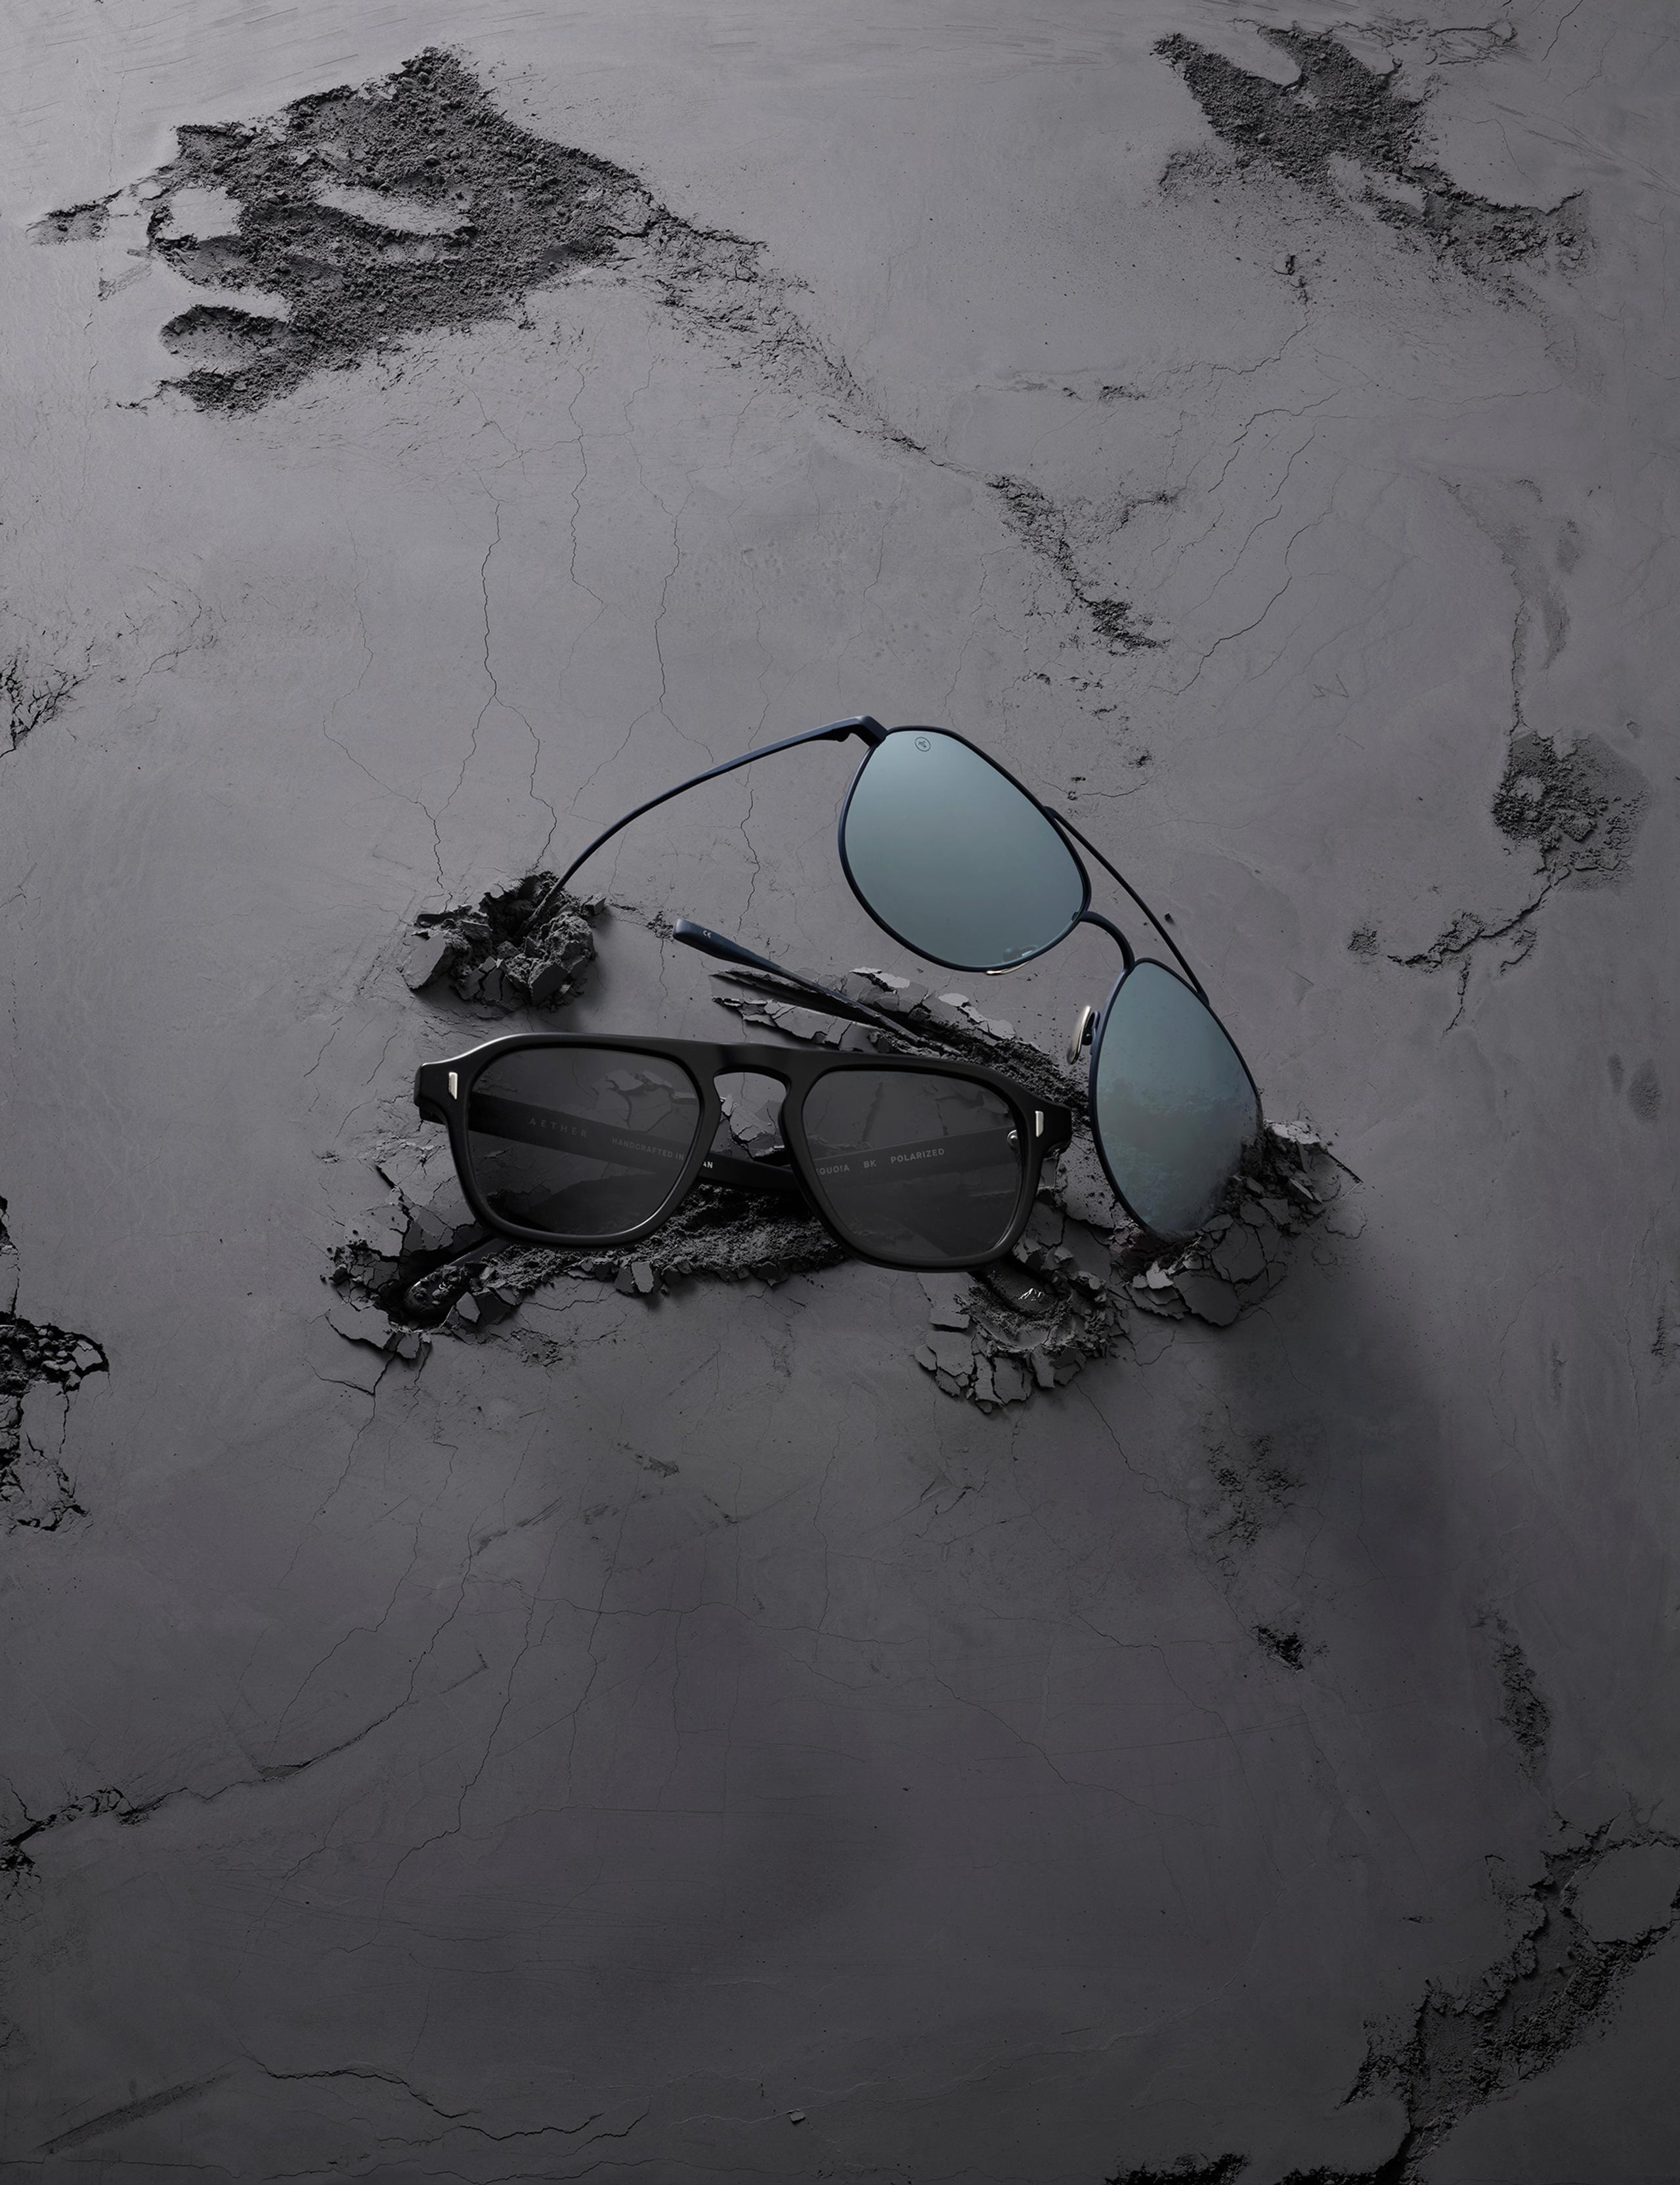 Sequoia and Bryce sunglasses arranged in studio on concrete looking material